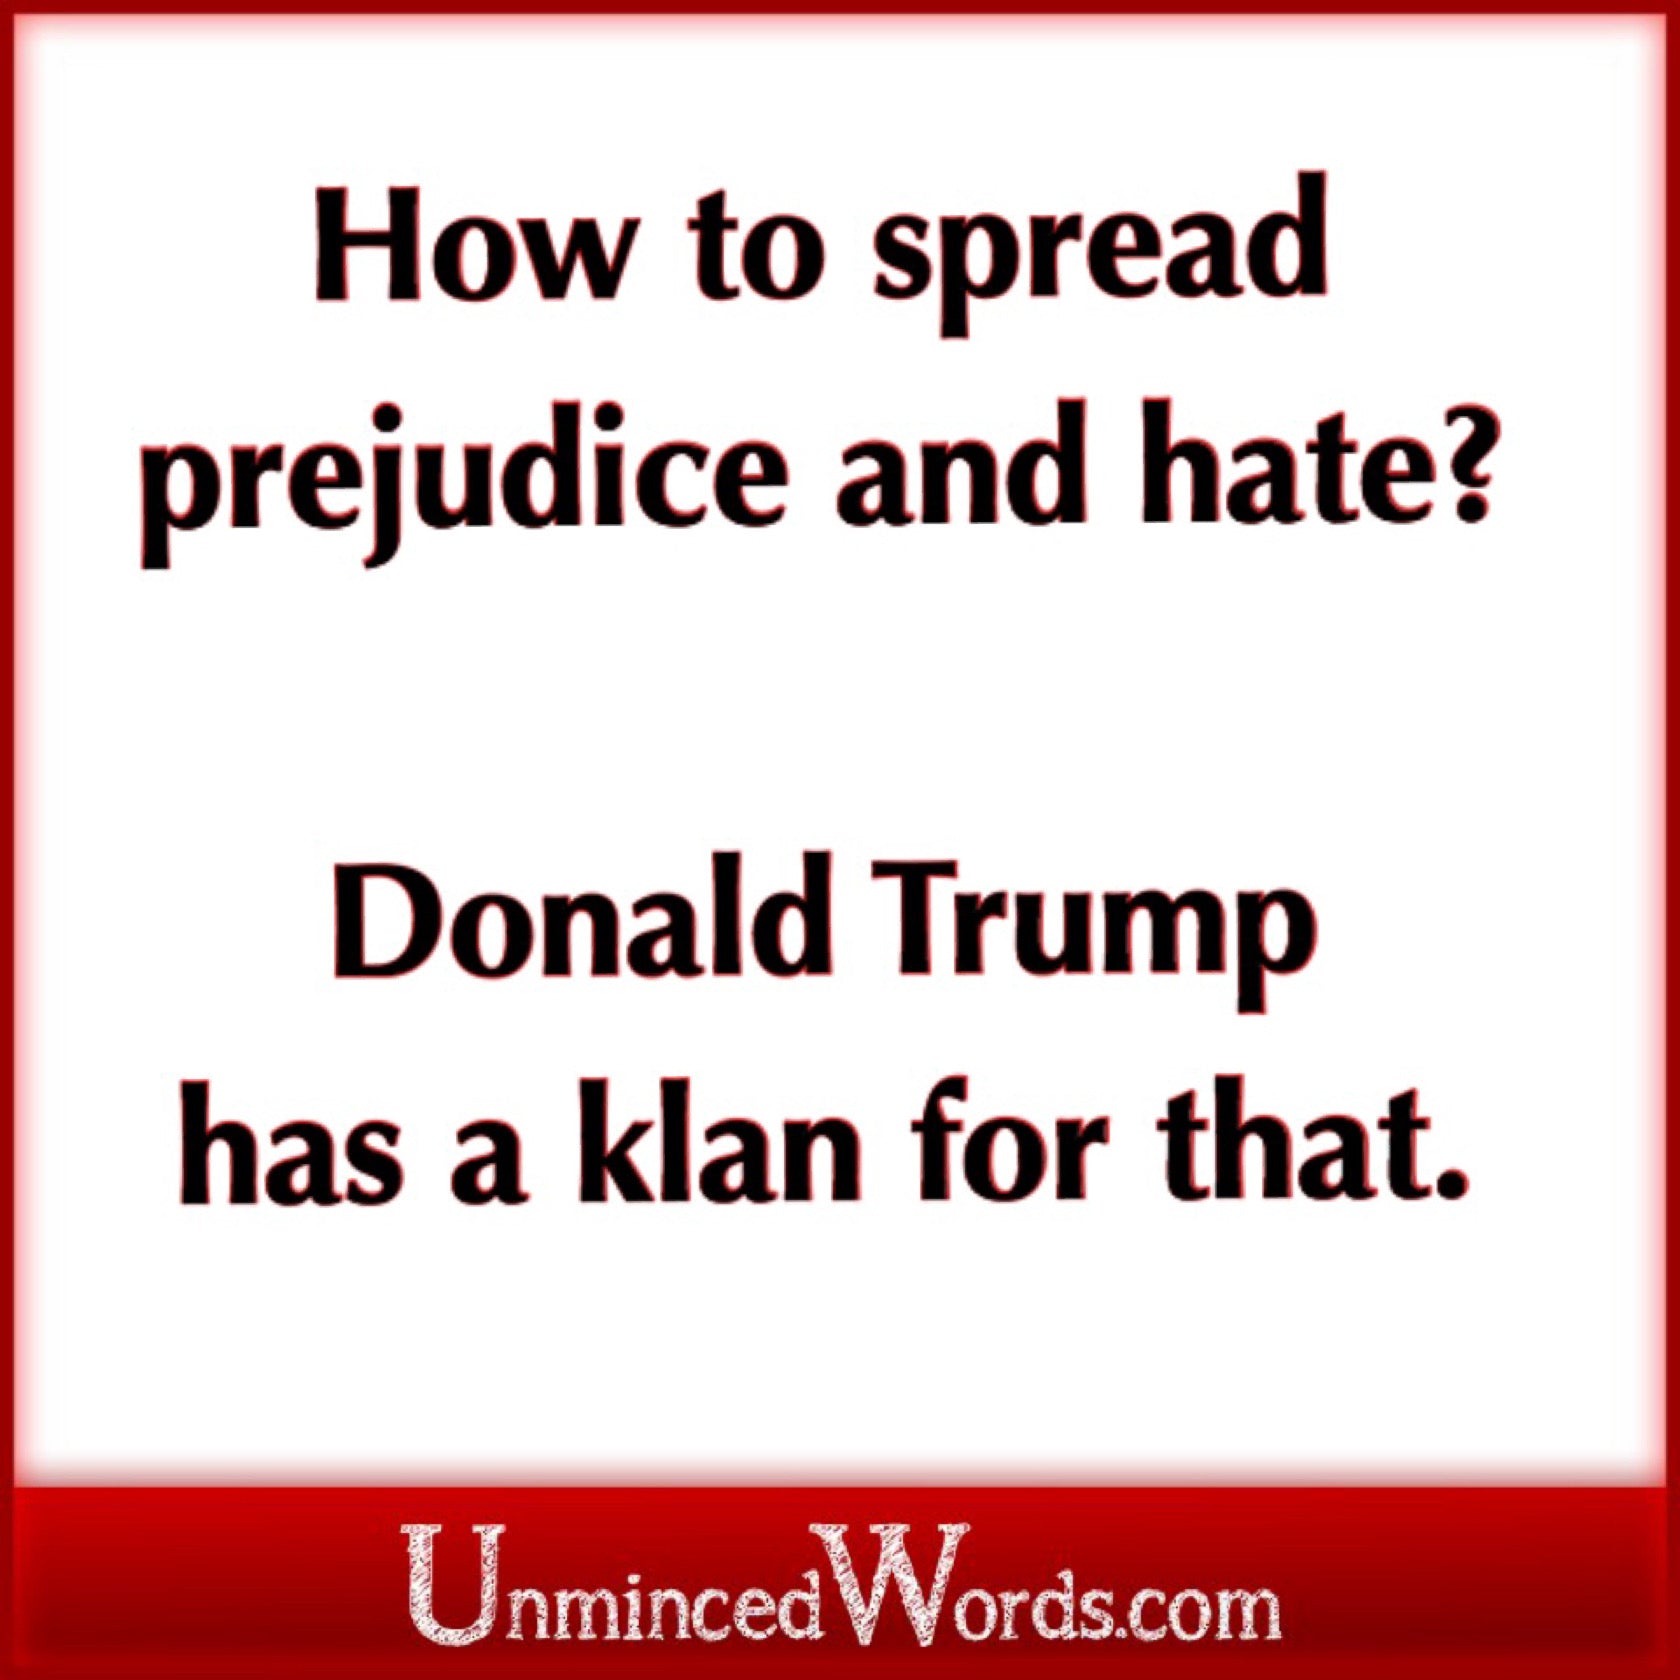 How to spread prejudice and hate? Donald Trump has a Klan for that!